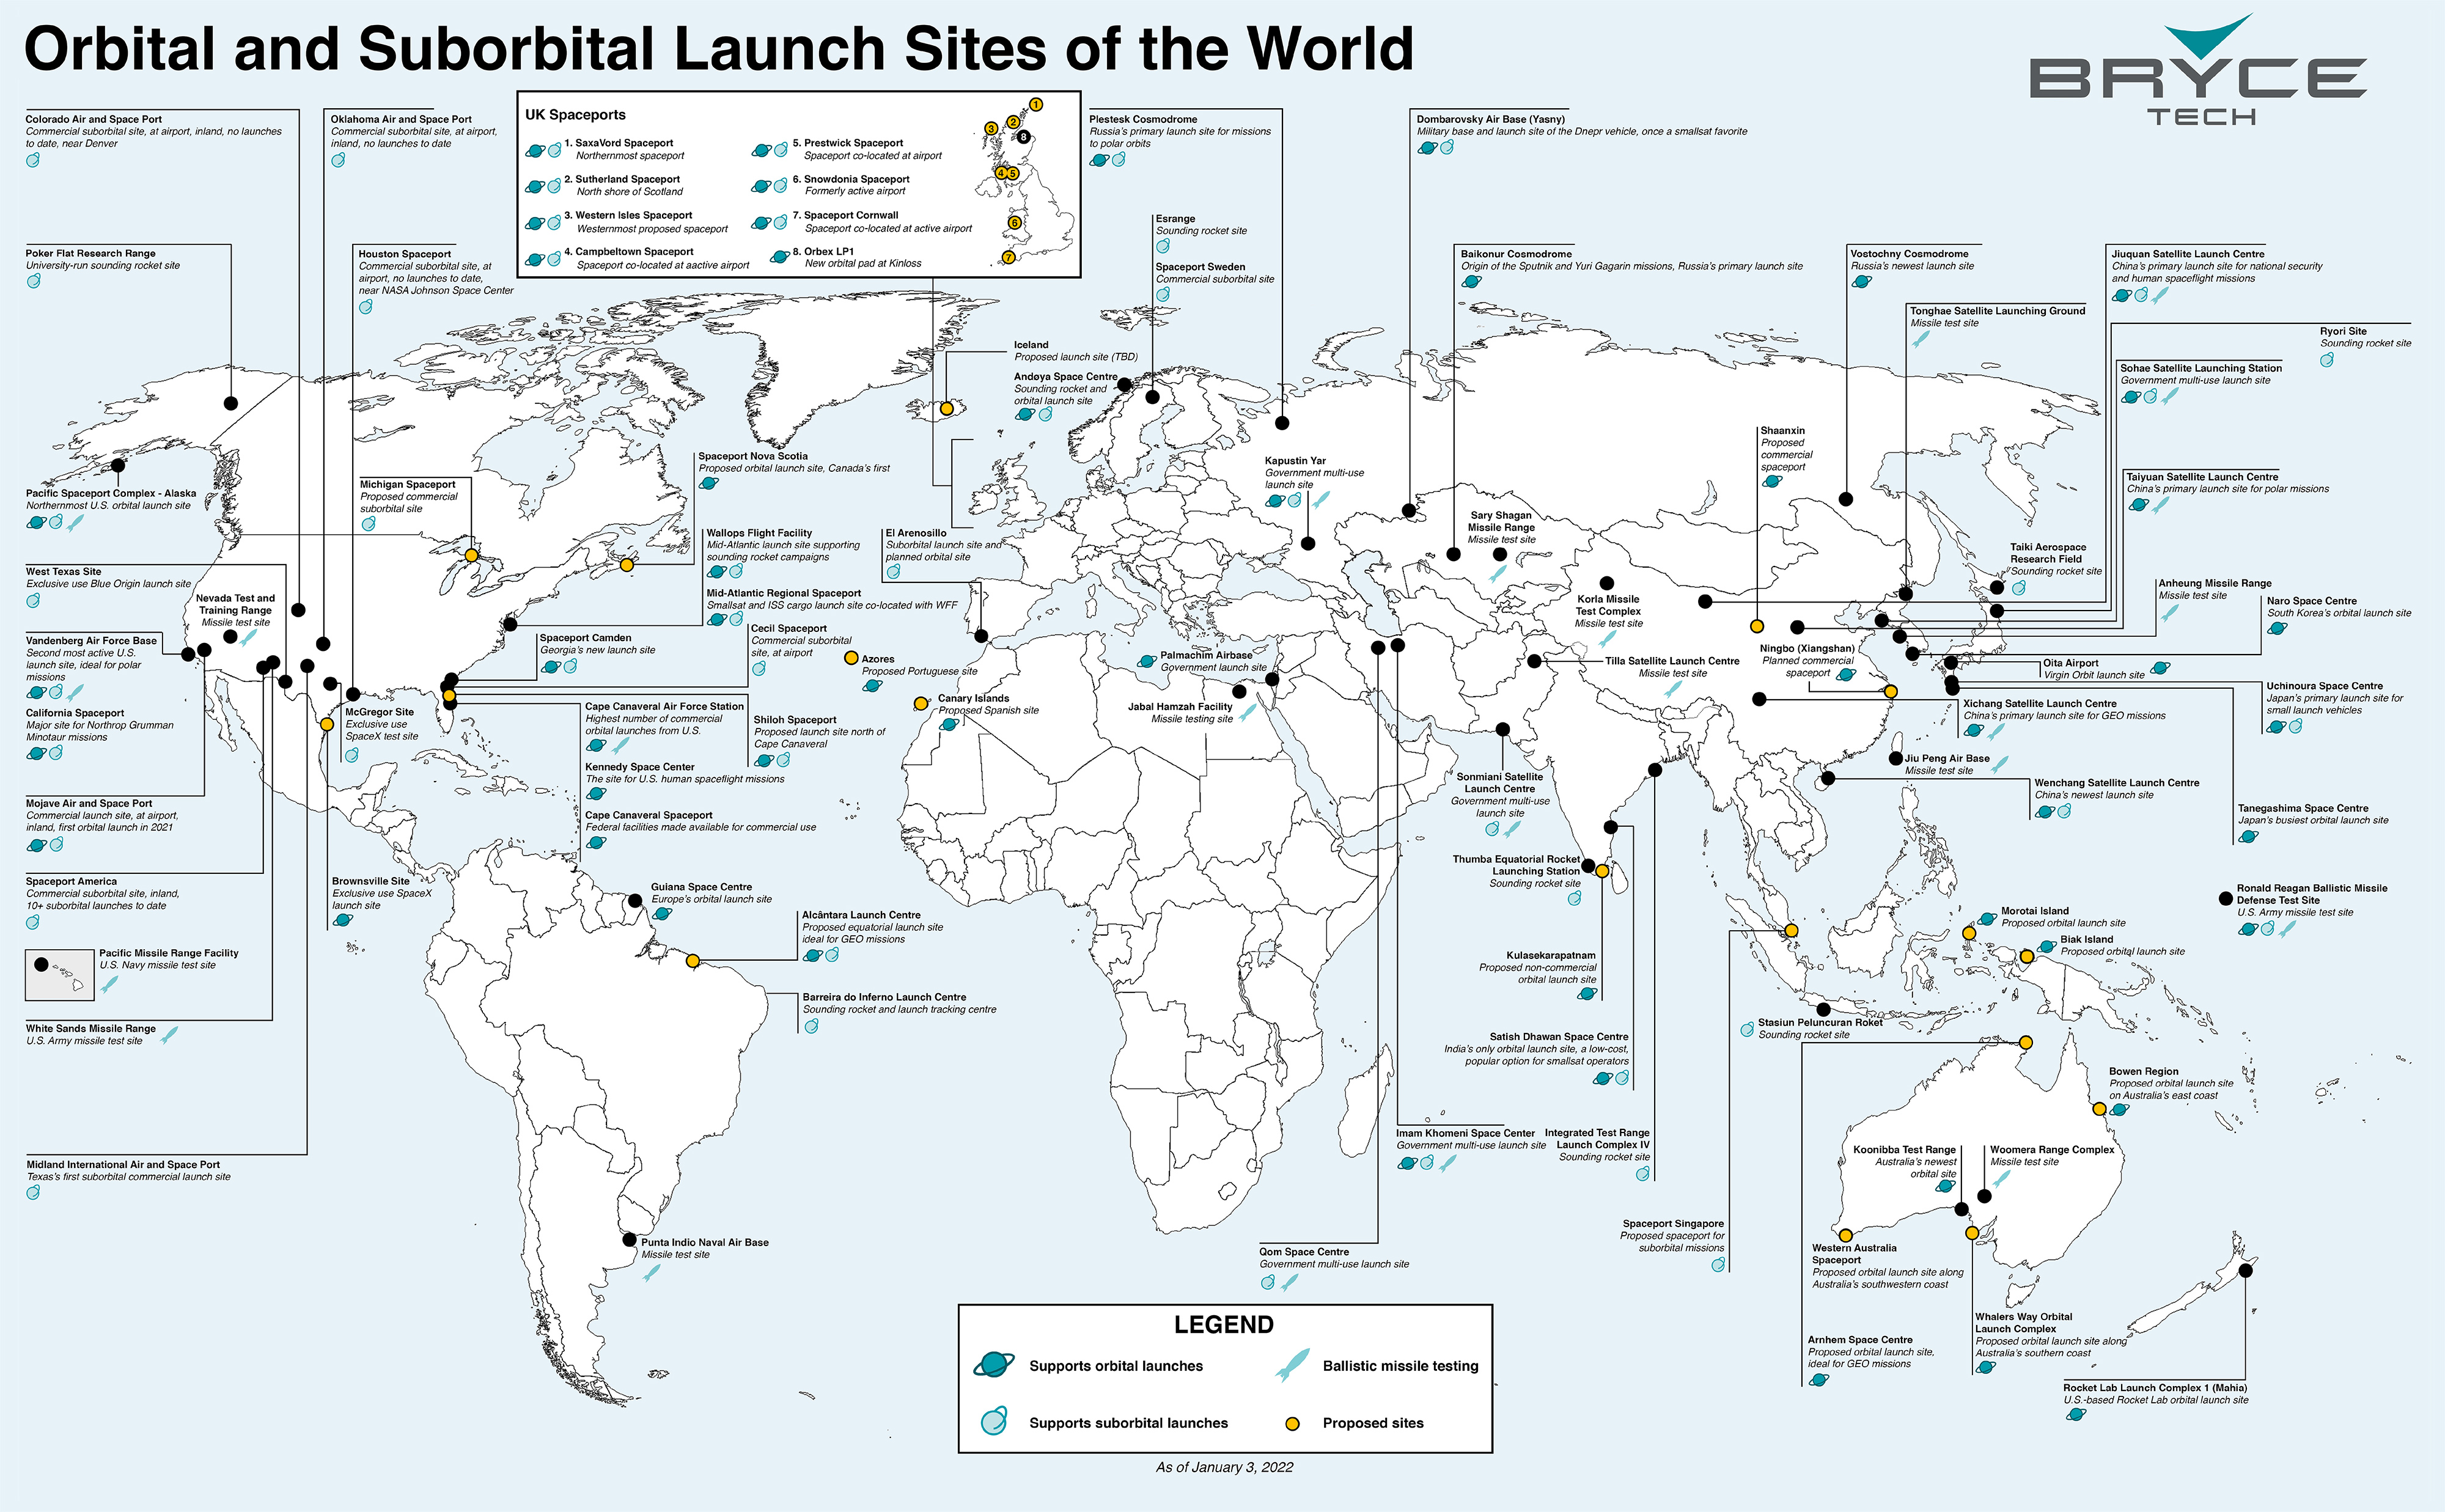 World map showing orbital and suborbital rocket launch sites